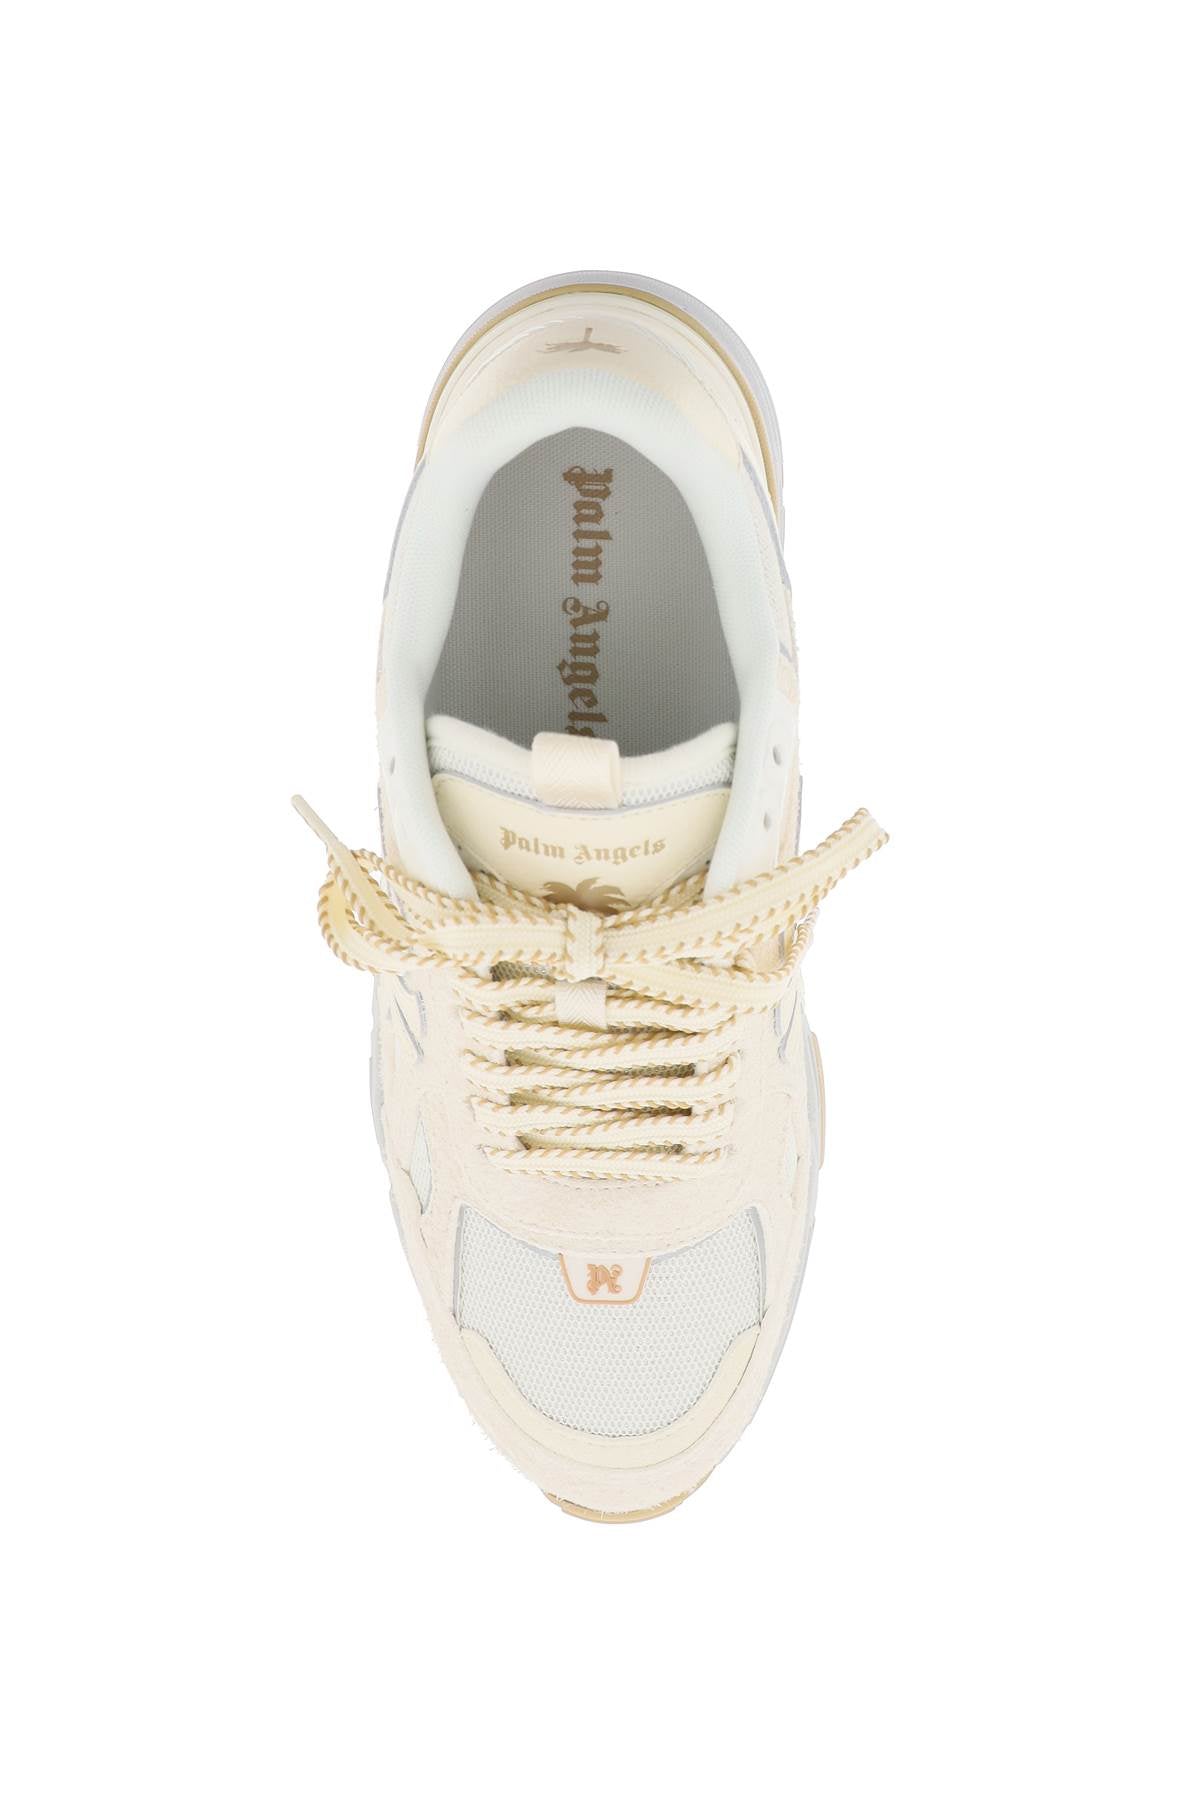 Palm angels palm runner sneakers for-1